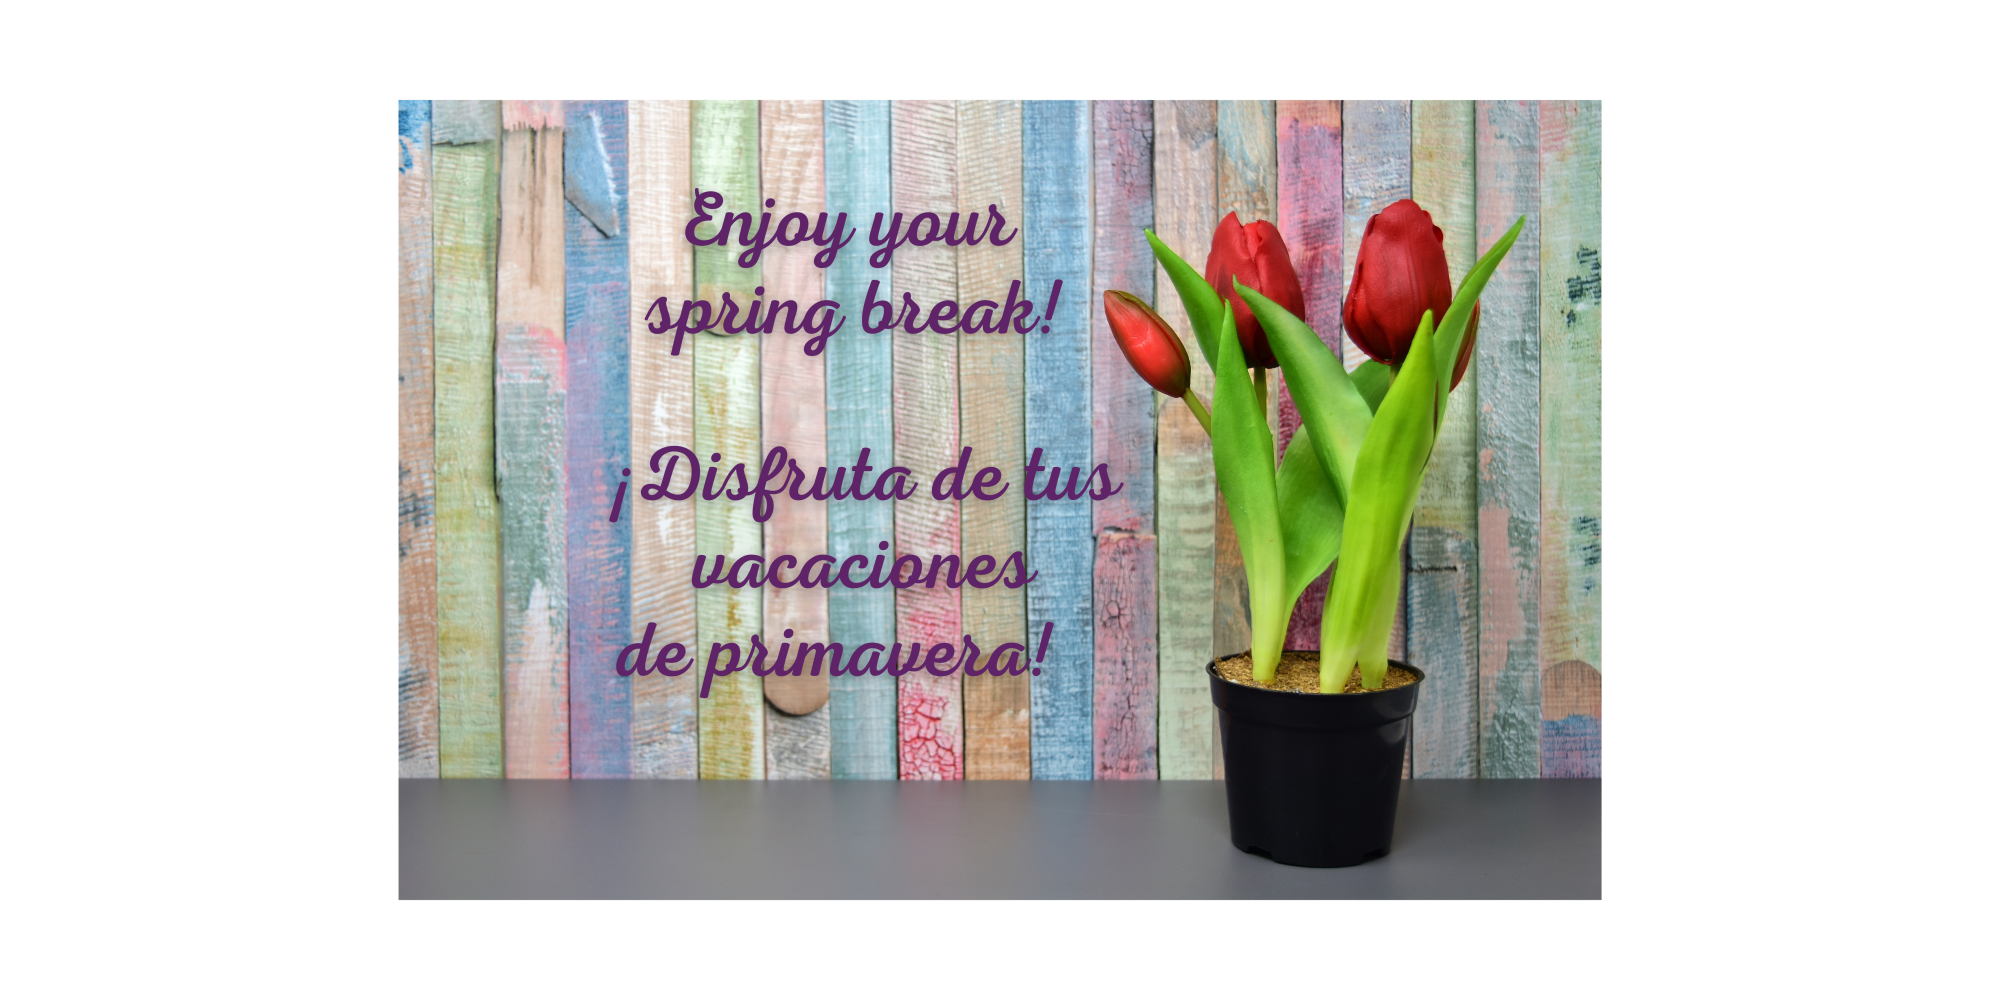 Image of red tulips in a black against a background of a fence painted in pastel colors (blue, pink, green) with purple text that says, "Enjoy your spring break!" and "Disfruta de tus vacaciones de primavera!"